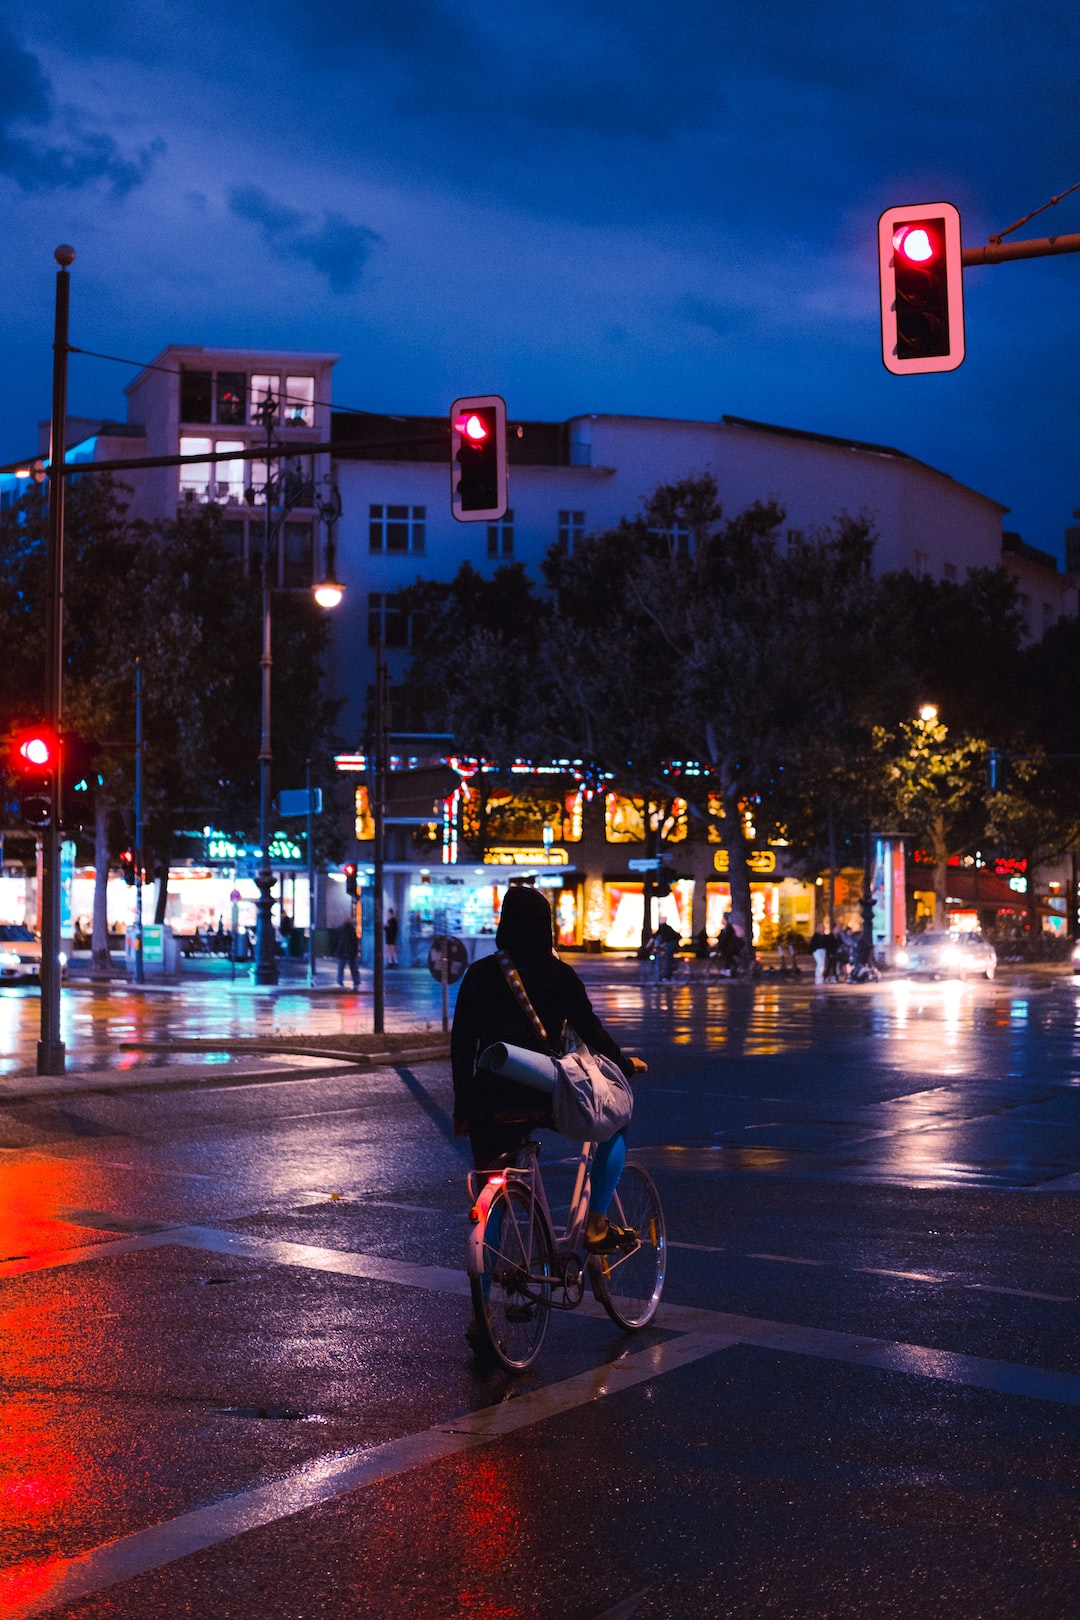 Some girl on a bike waiting at the traffic light in Berlin on a rainy evening.